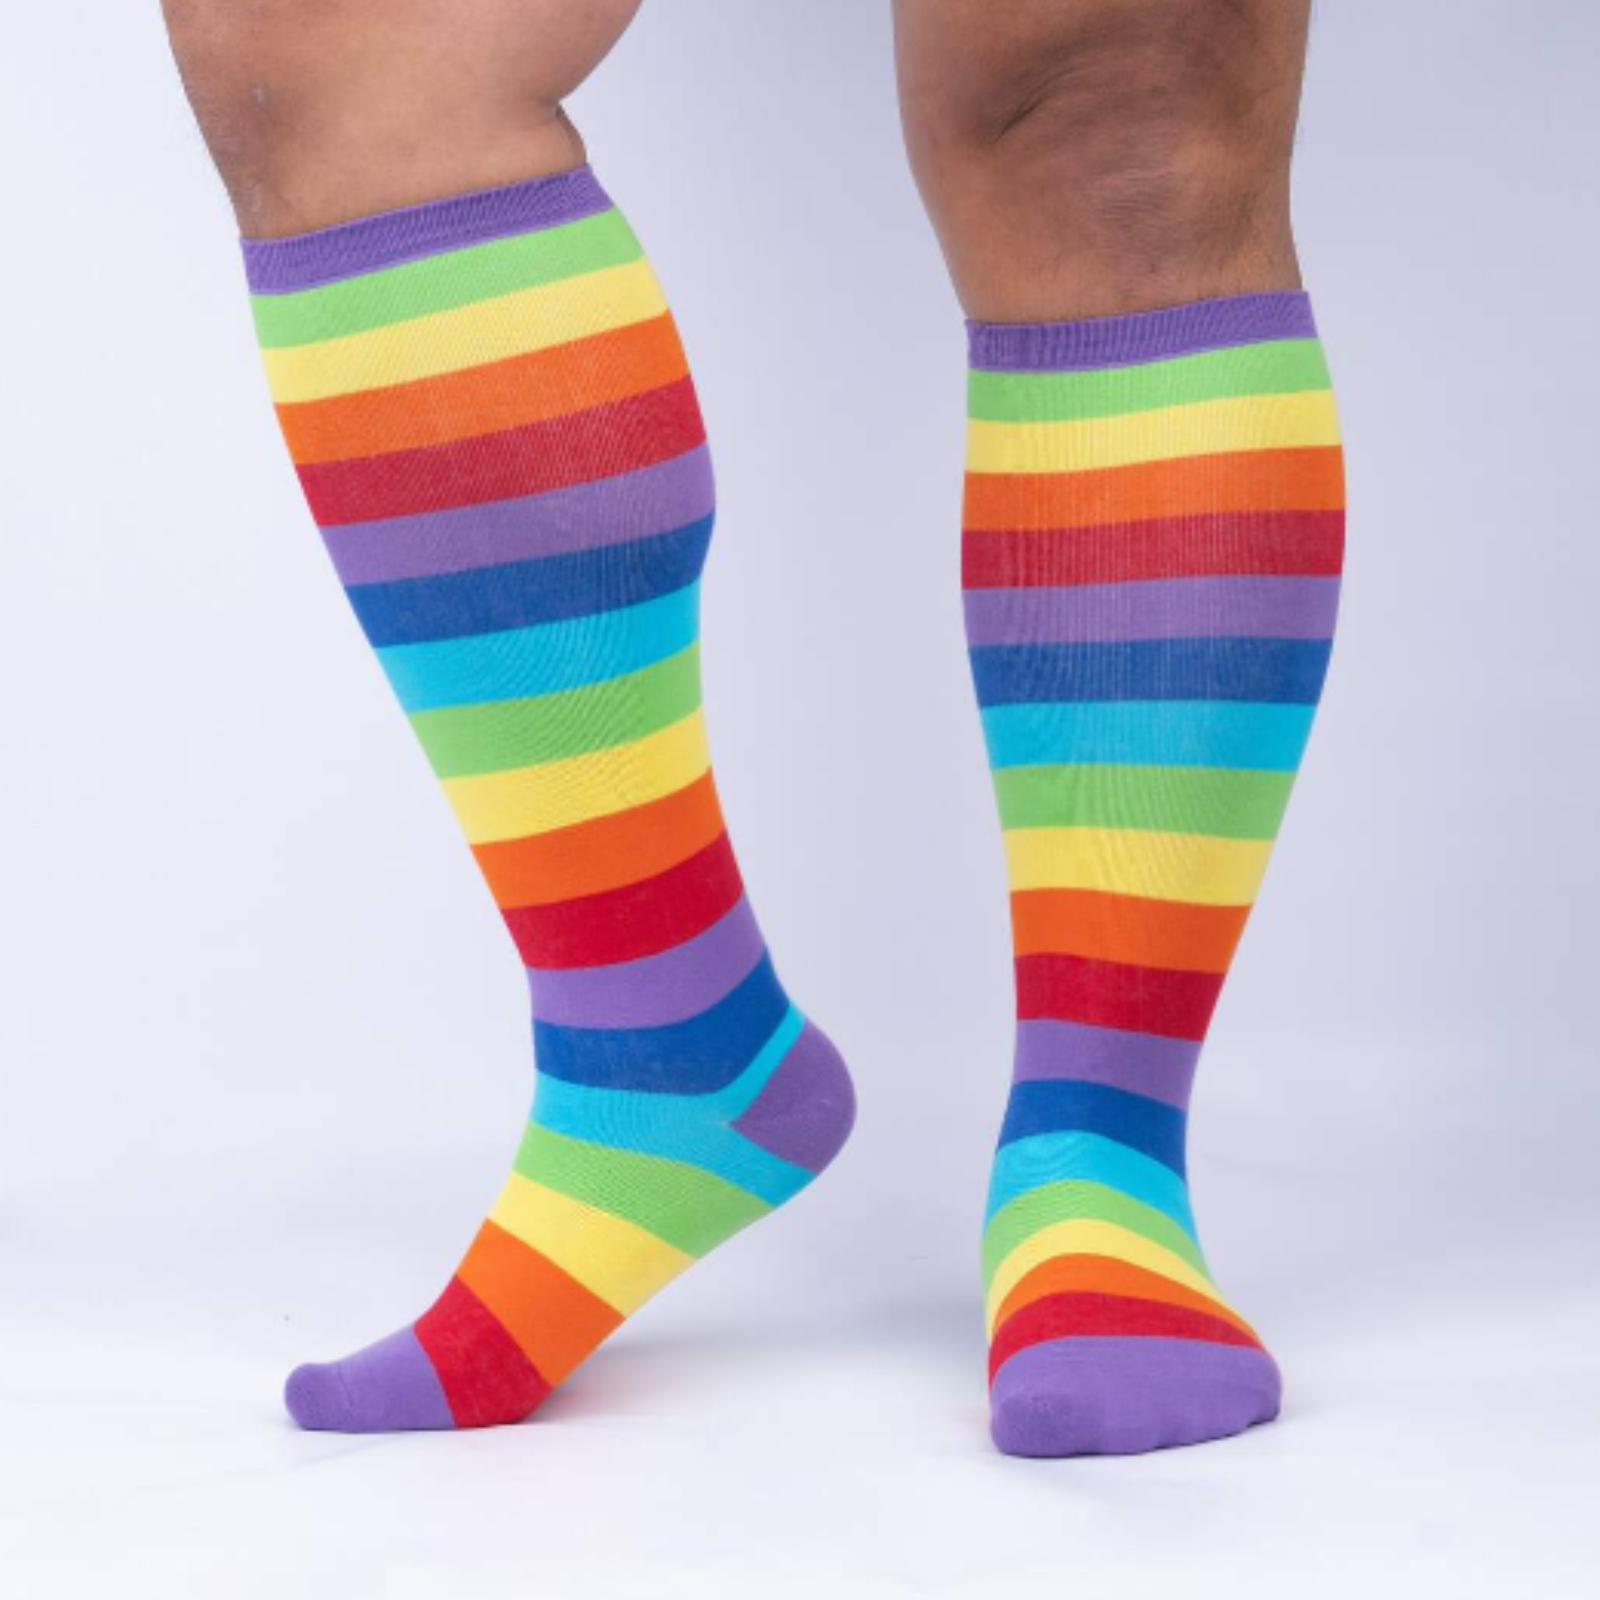 Sock It To Me Super Juicy extra-stretchy knee high socks featuring rainbow stripes all over. Socks shown on model from the side. 